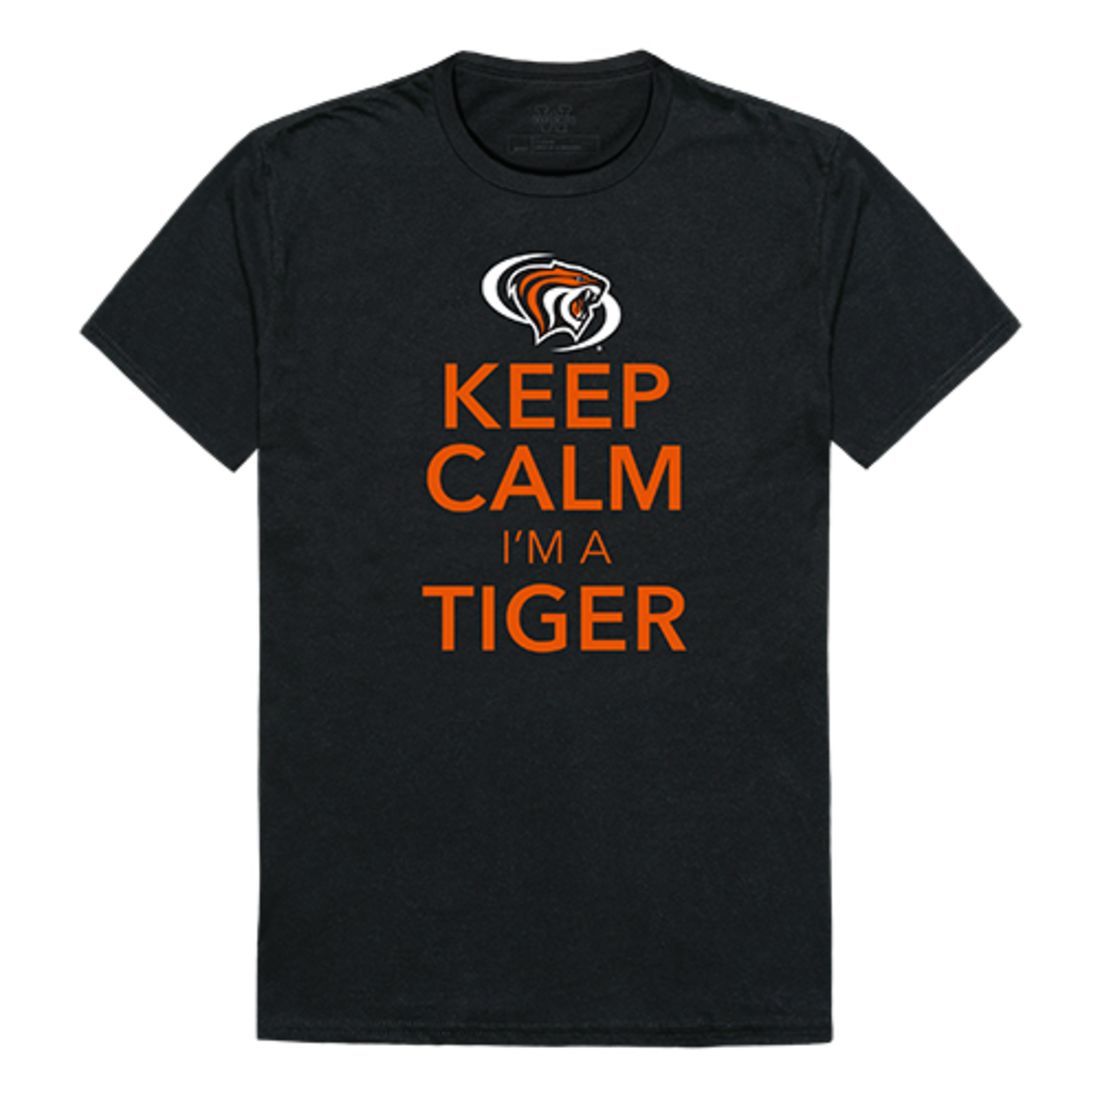 University of the Pacific Tigers Keep Calm T-Shirt Black-Campus-Wardrobe